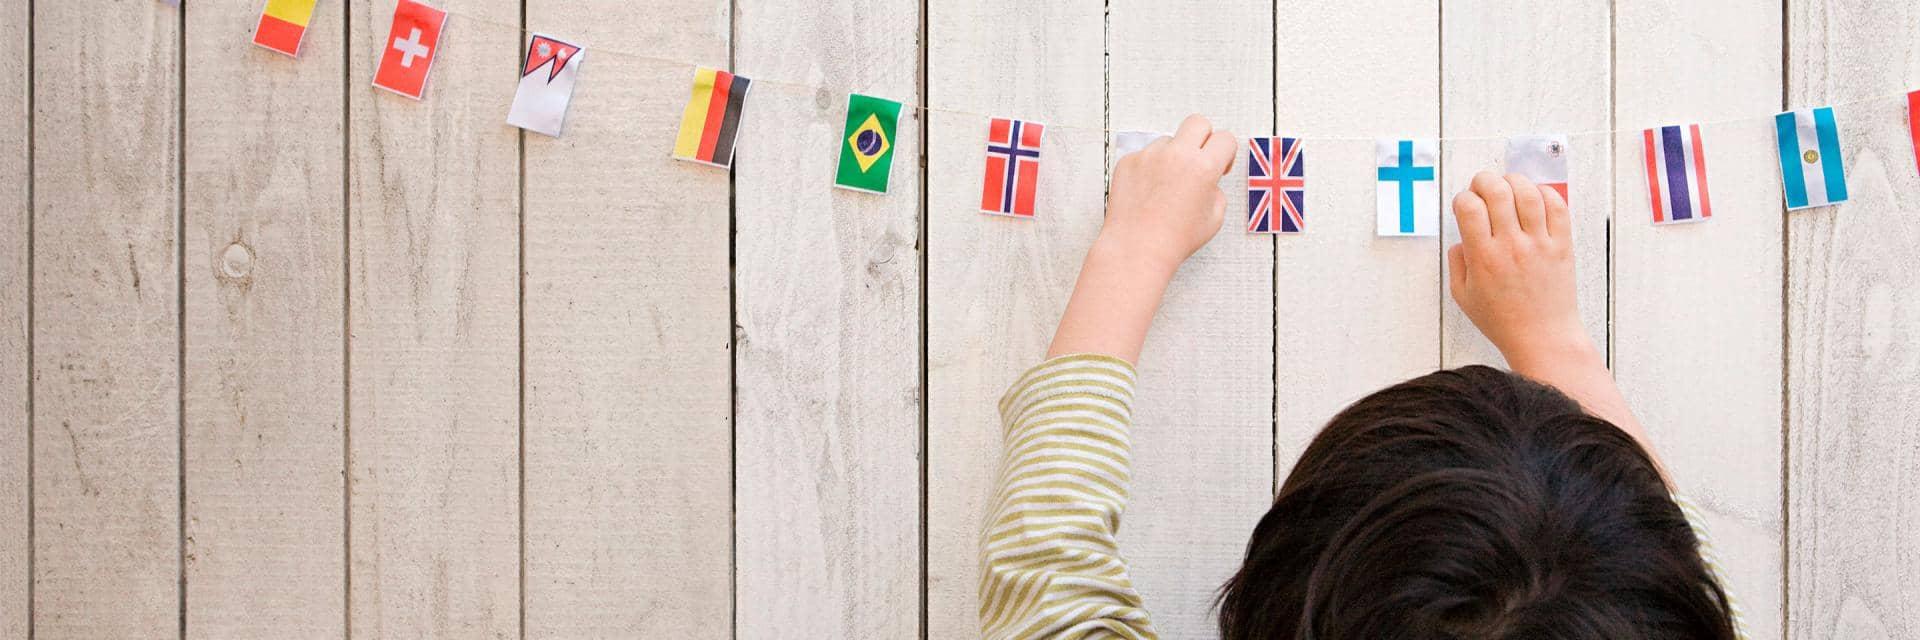  A child reaches up to touch a selection of national flags hanging on a piece of string against wooden cladding